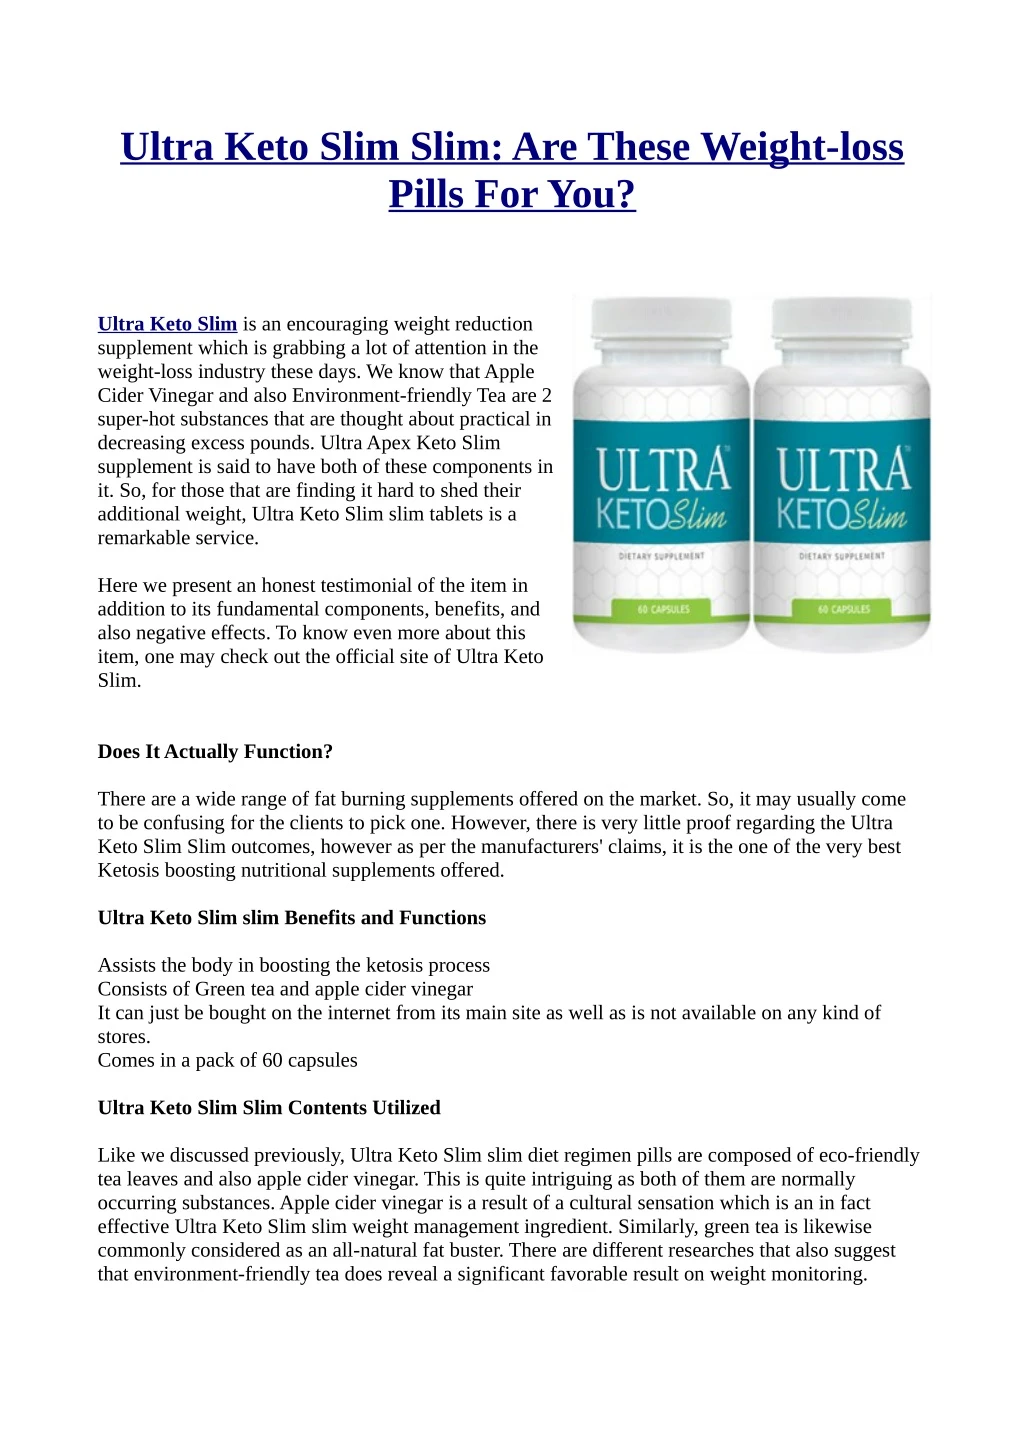 ultra keto slim slim are these weight loss pills